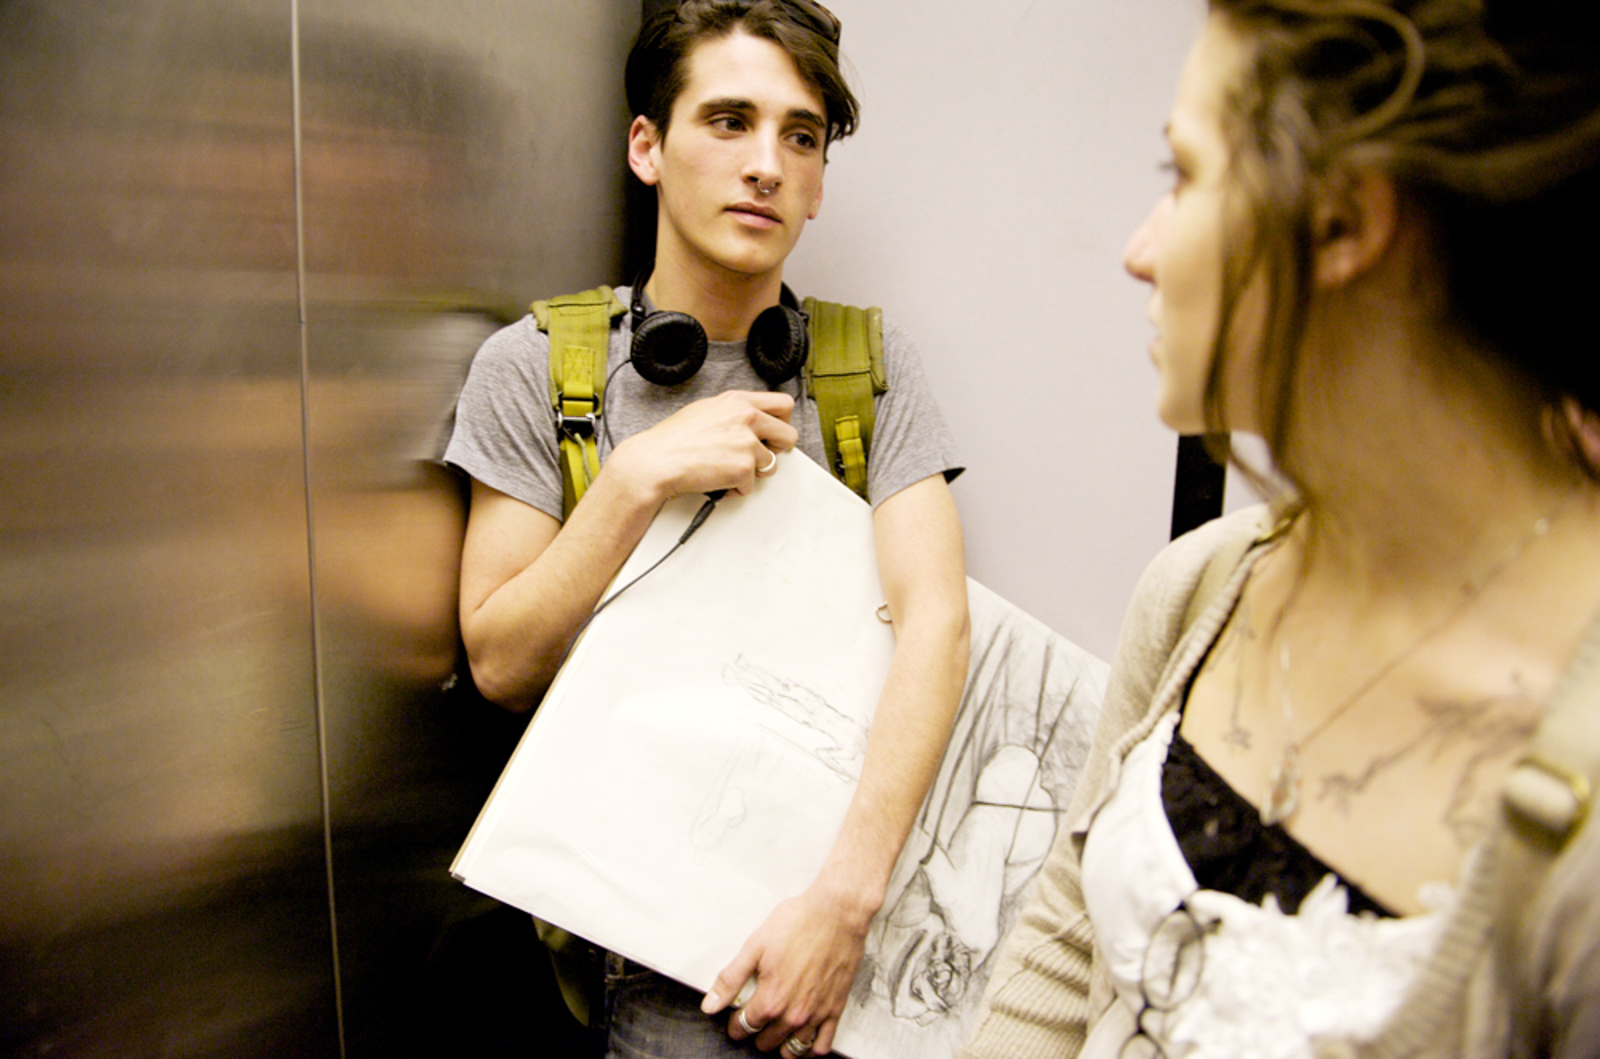 Male student in an elevator wearing headphones, with female student looking back